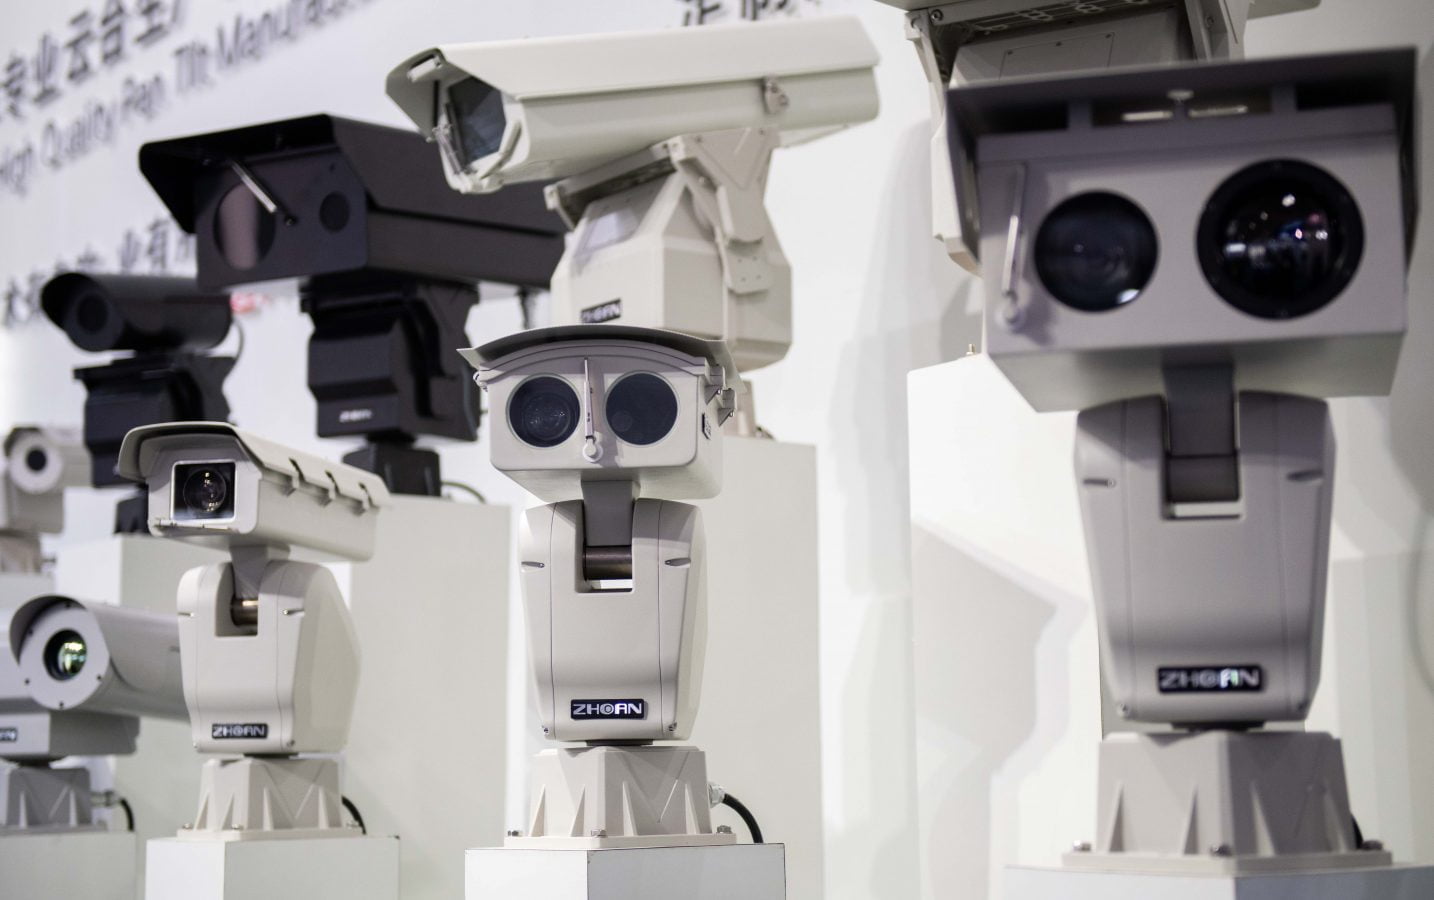 AI (artificial intelligence) security cameras using facial recognition technology are displayed at the 14th China International Exhibition on Public Safety and Security at the China International Exhibition Center in Beijing